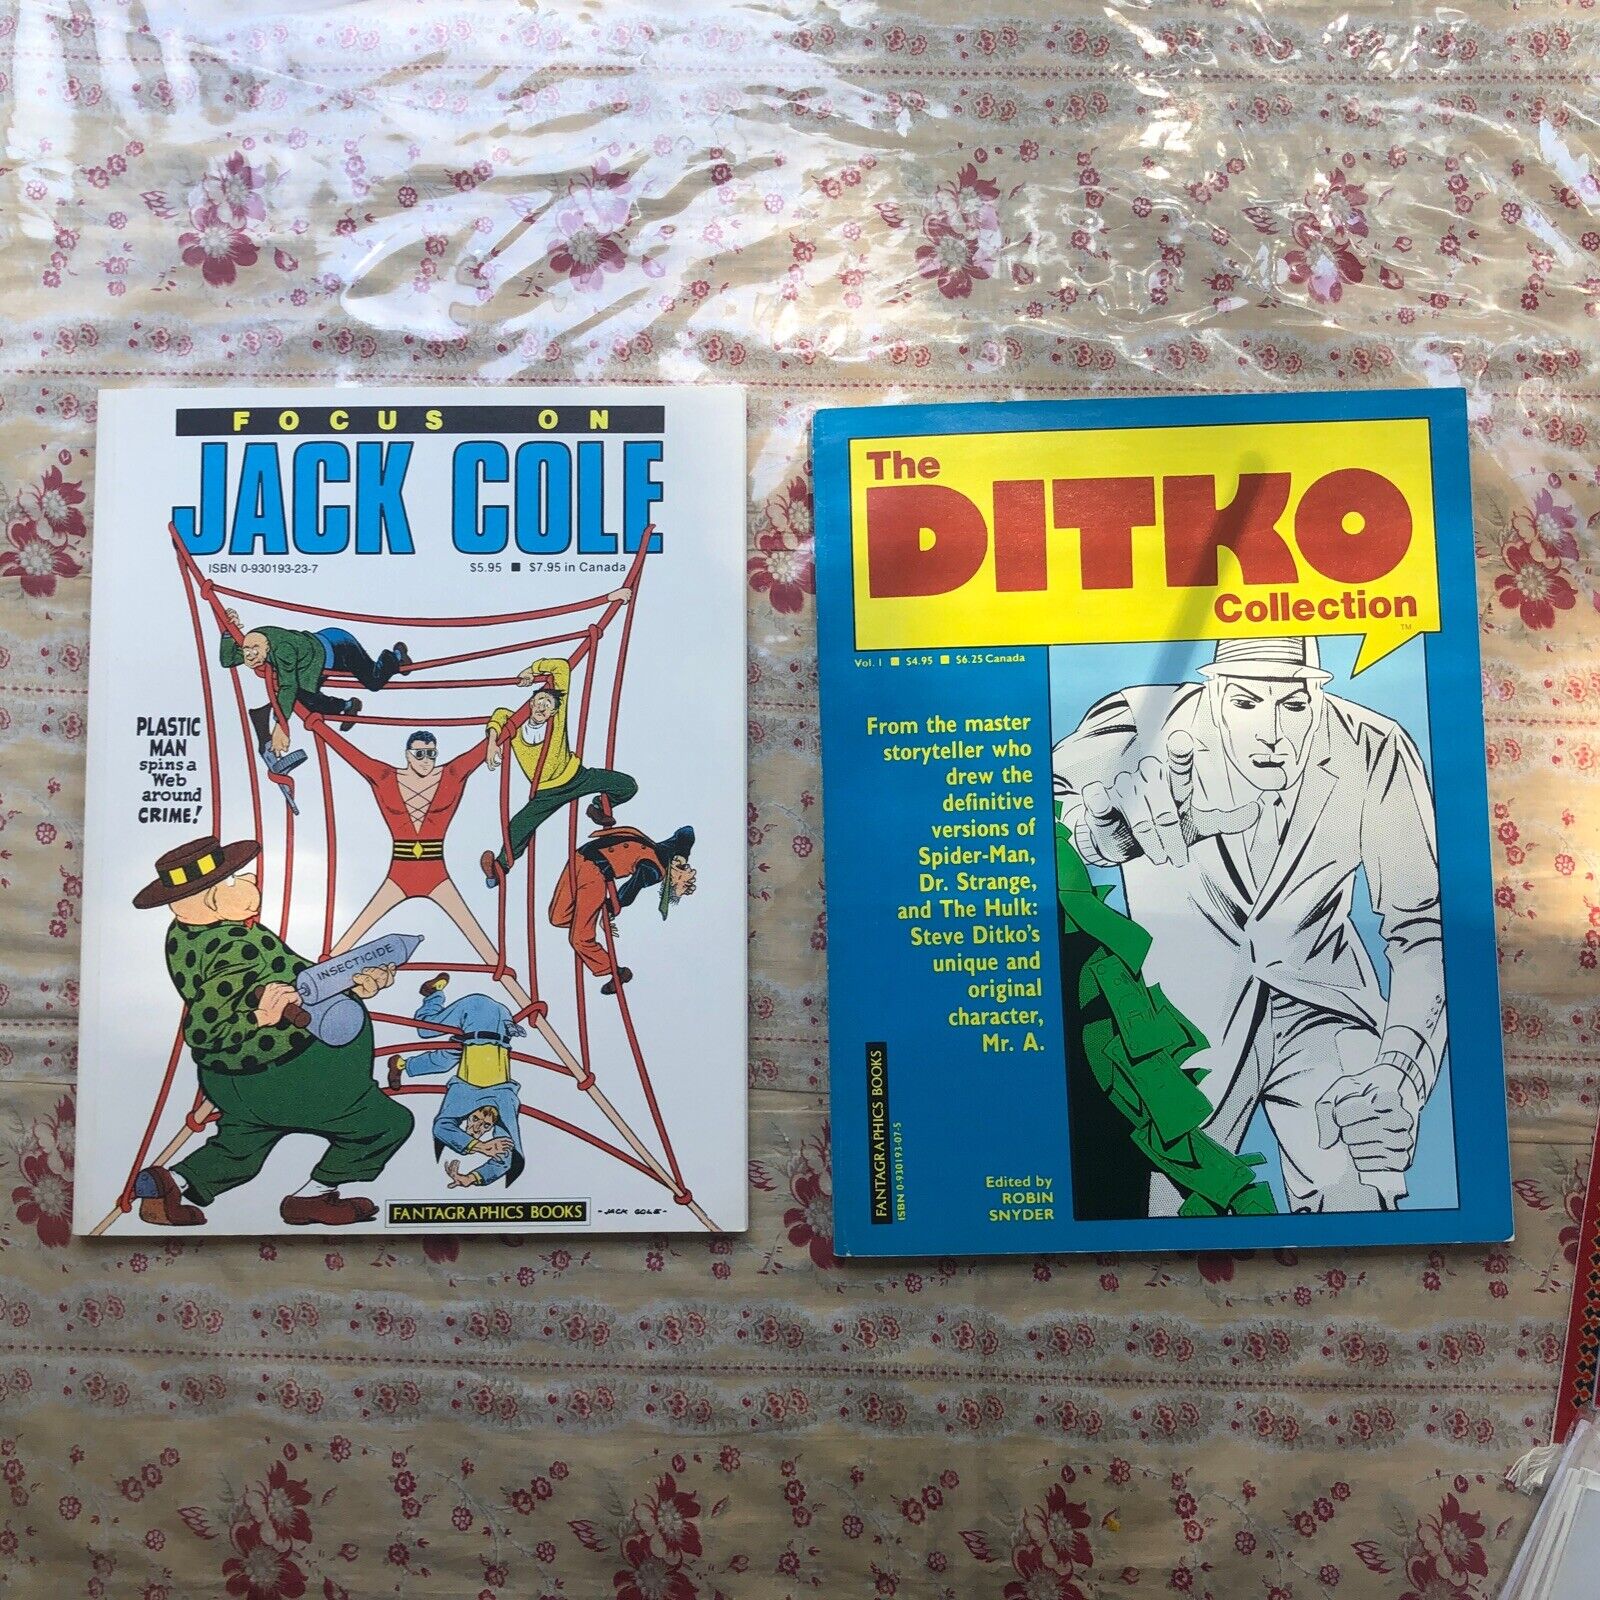 Steve Ditko Collection + Focus On Jack Cole TPB Rare Fantagraphics Collections